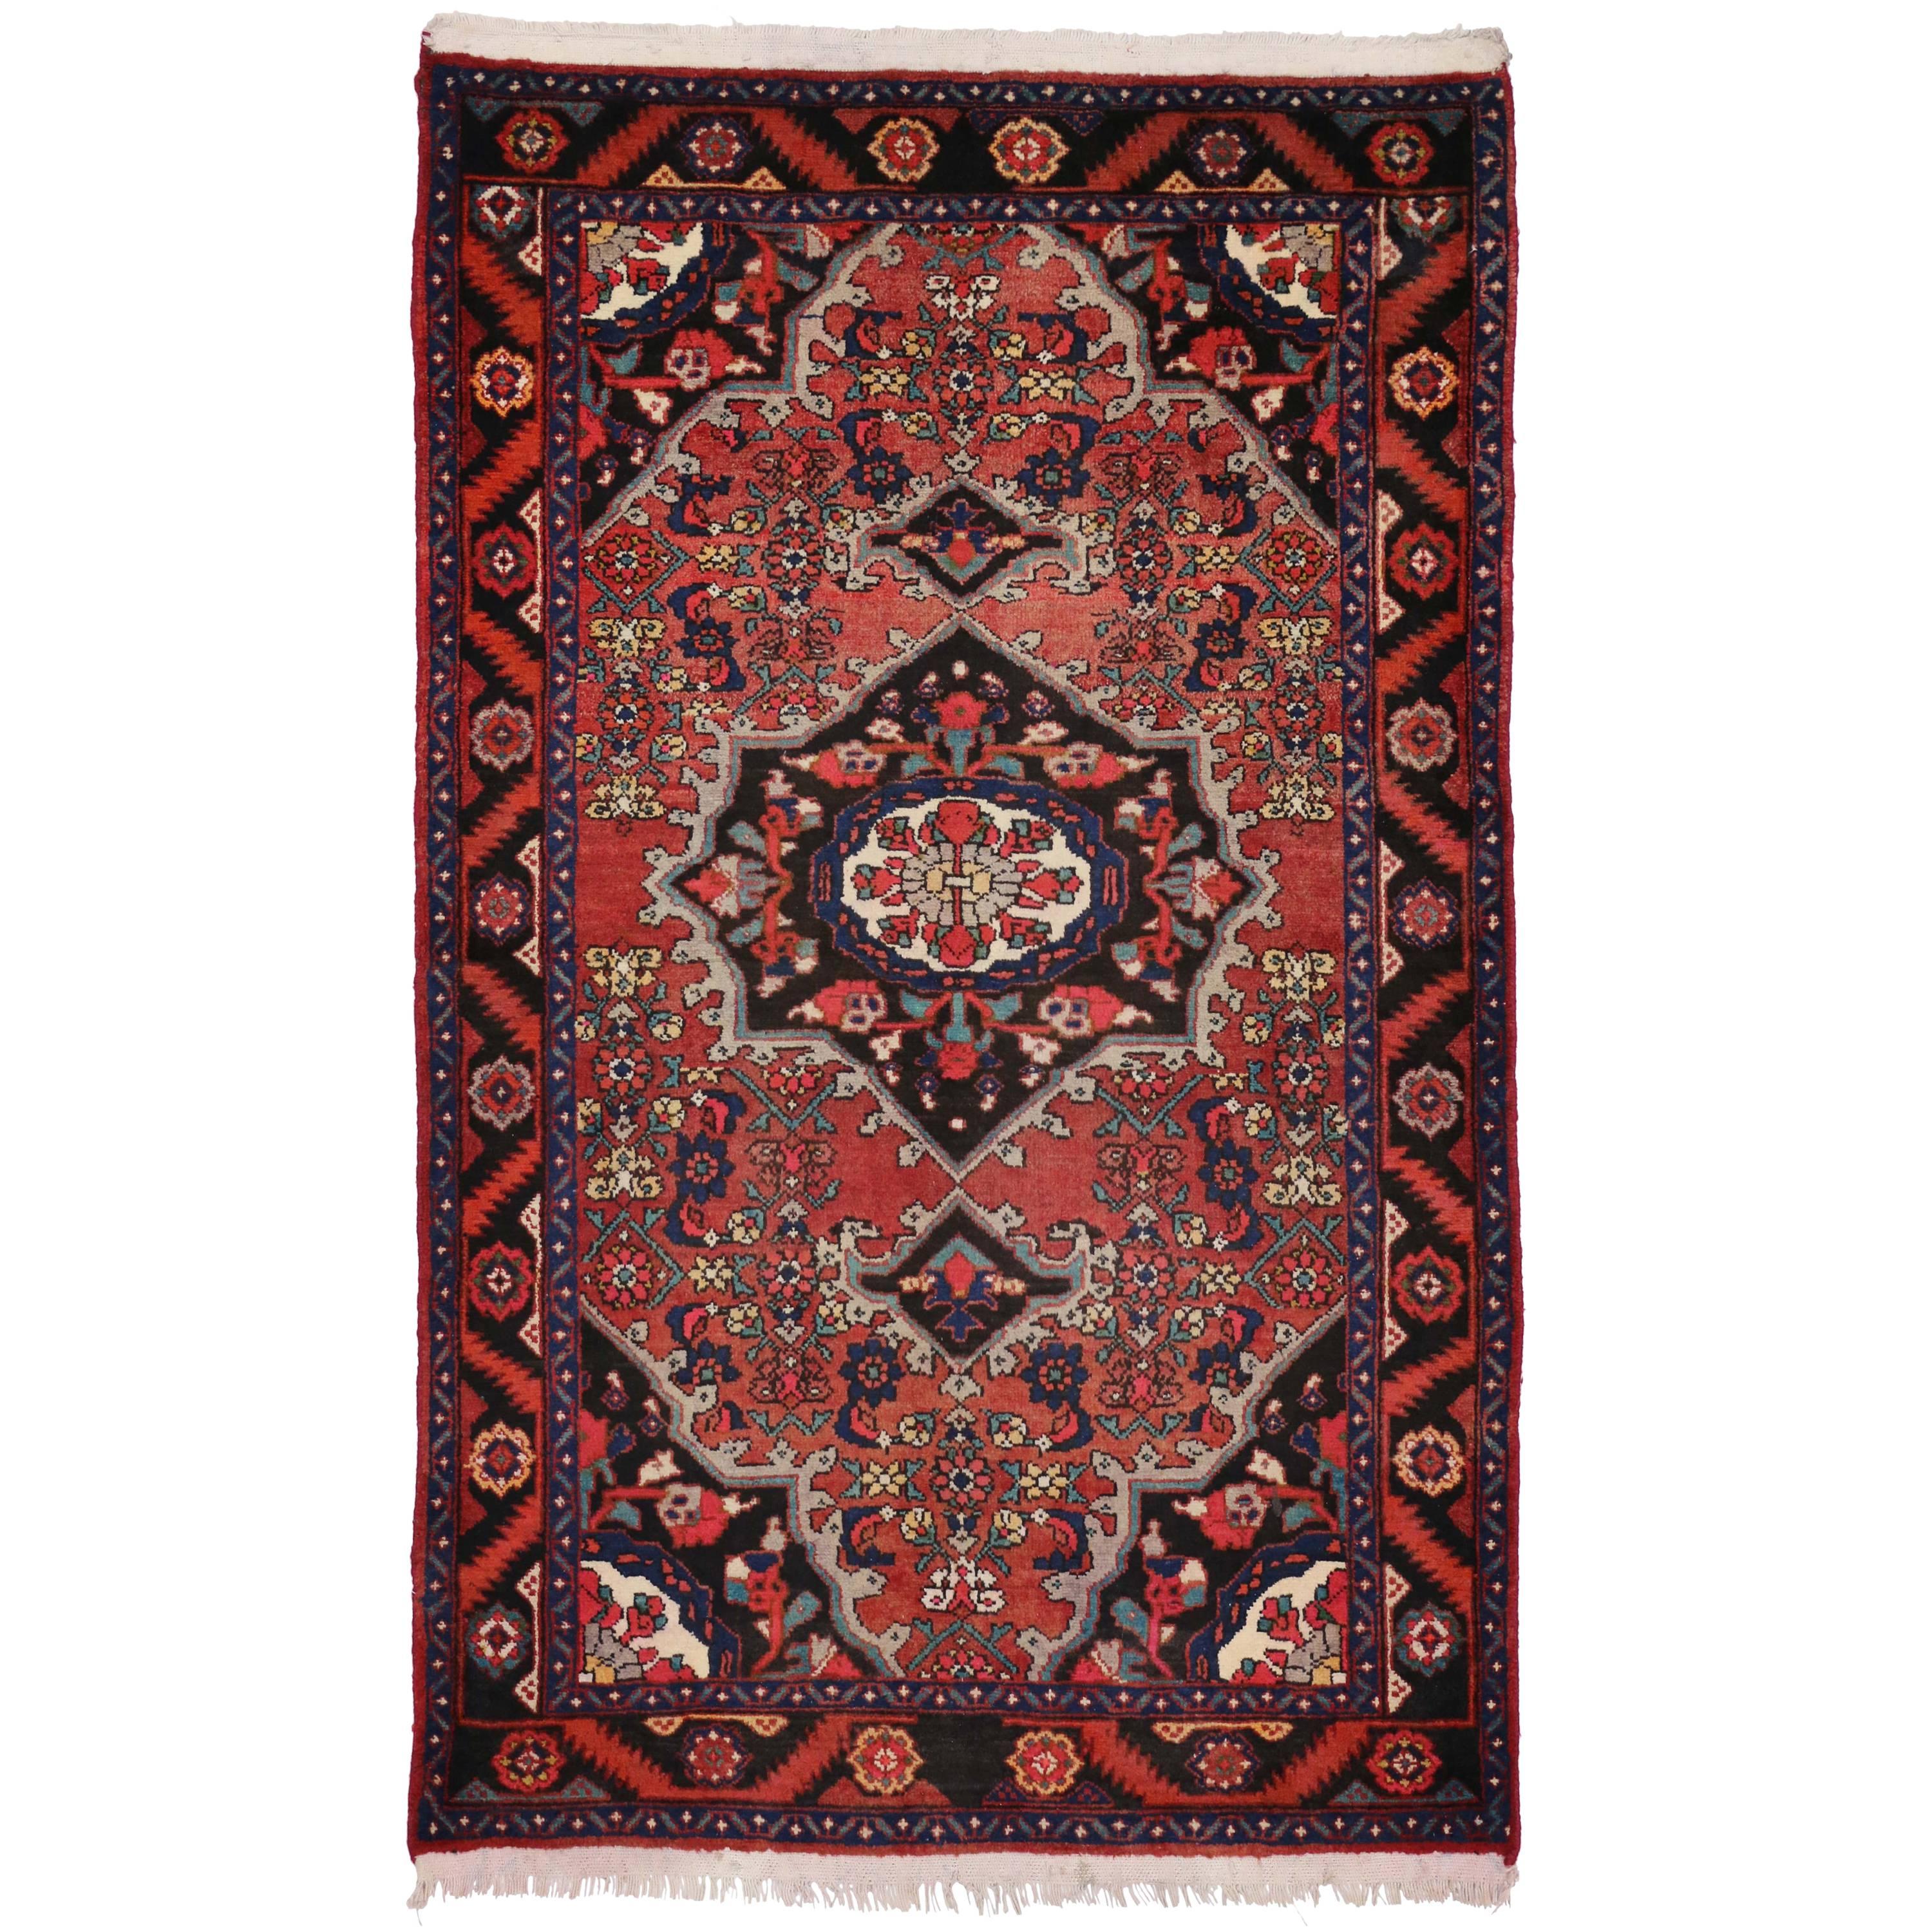 Rustic Style Vintage Persian Hamadan Accent Rug, Kitchen, Foyer or Entry Rug